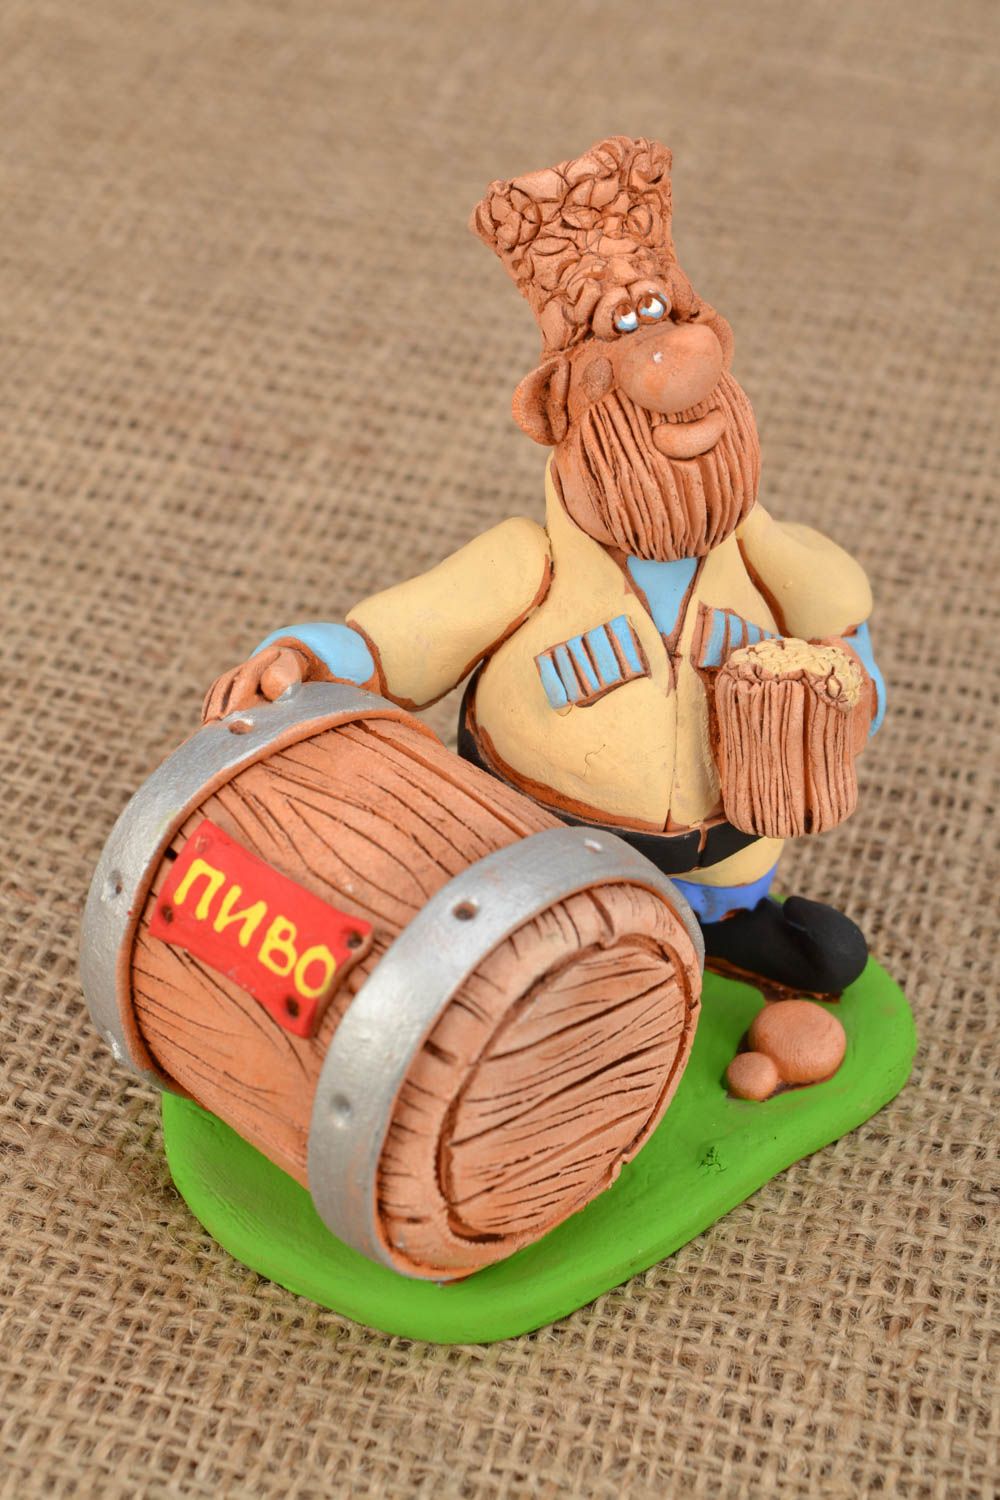 Ceramic figurine Cossack with a Barrel of Beer photo 1